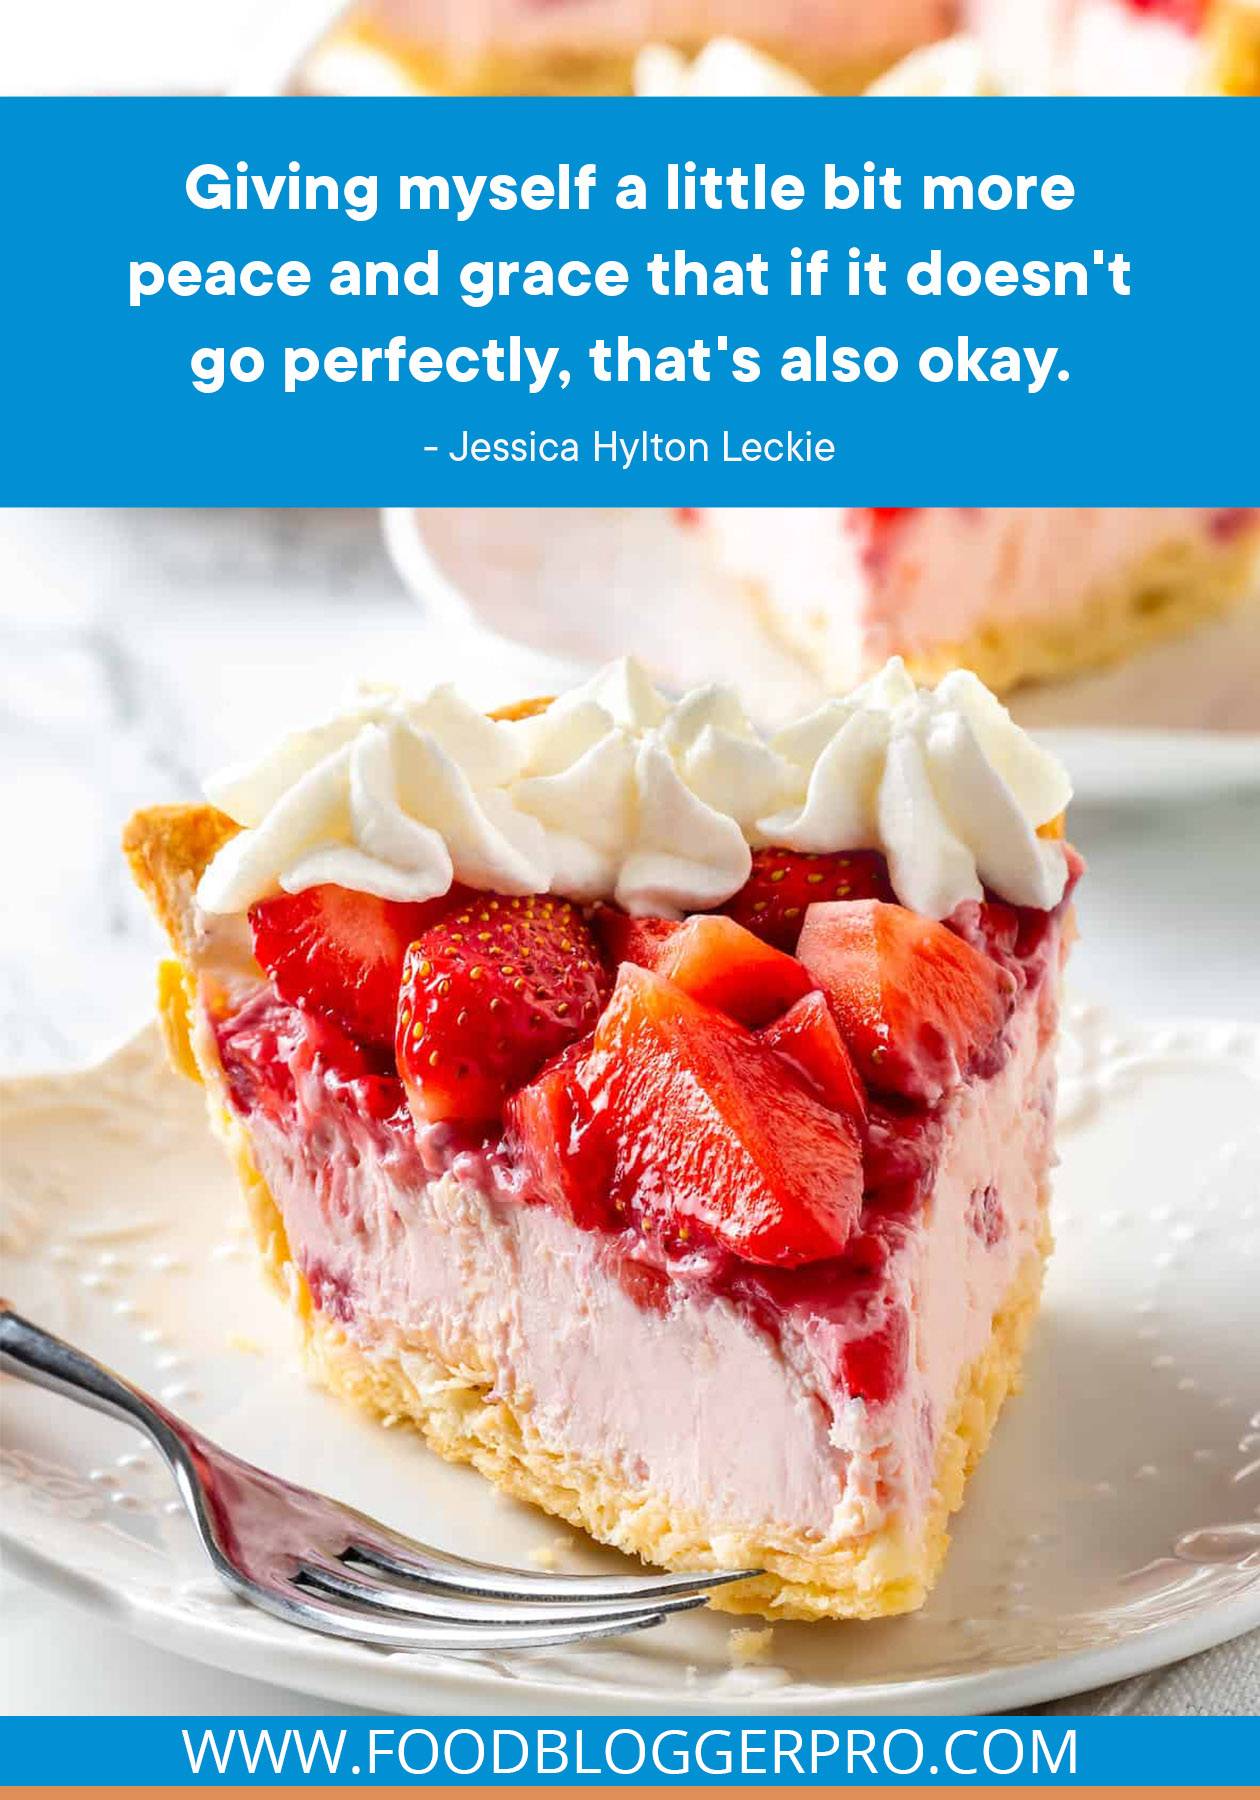 A photograph of strawberry pie with a quote from Jessica Hylton Leckie's episode of The Food Blogger Pro Podcast that reads: "Giving myself a little bit more peace and grace that if it doesn't go perfectly, that's also okay."